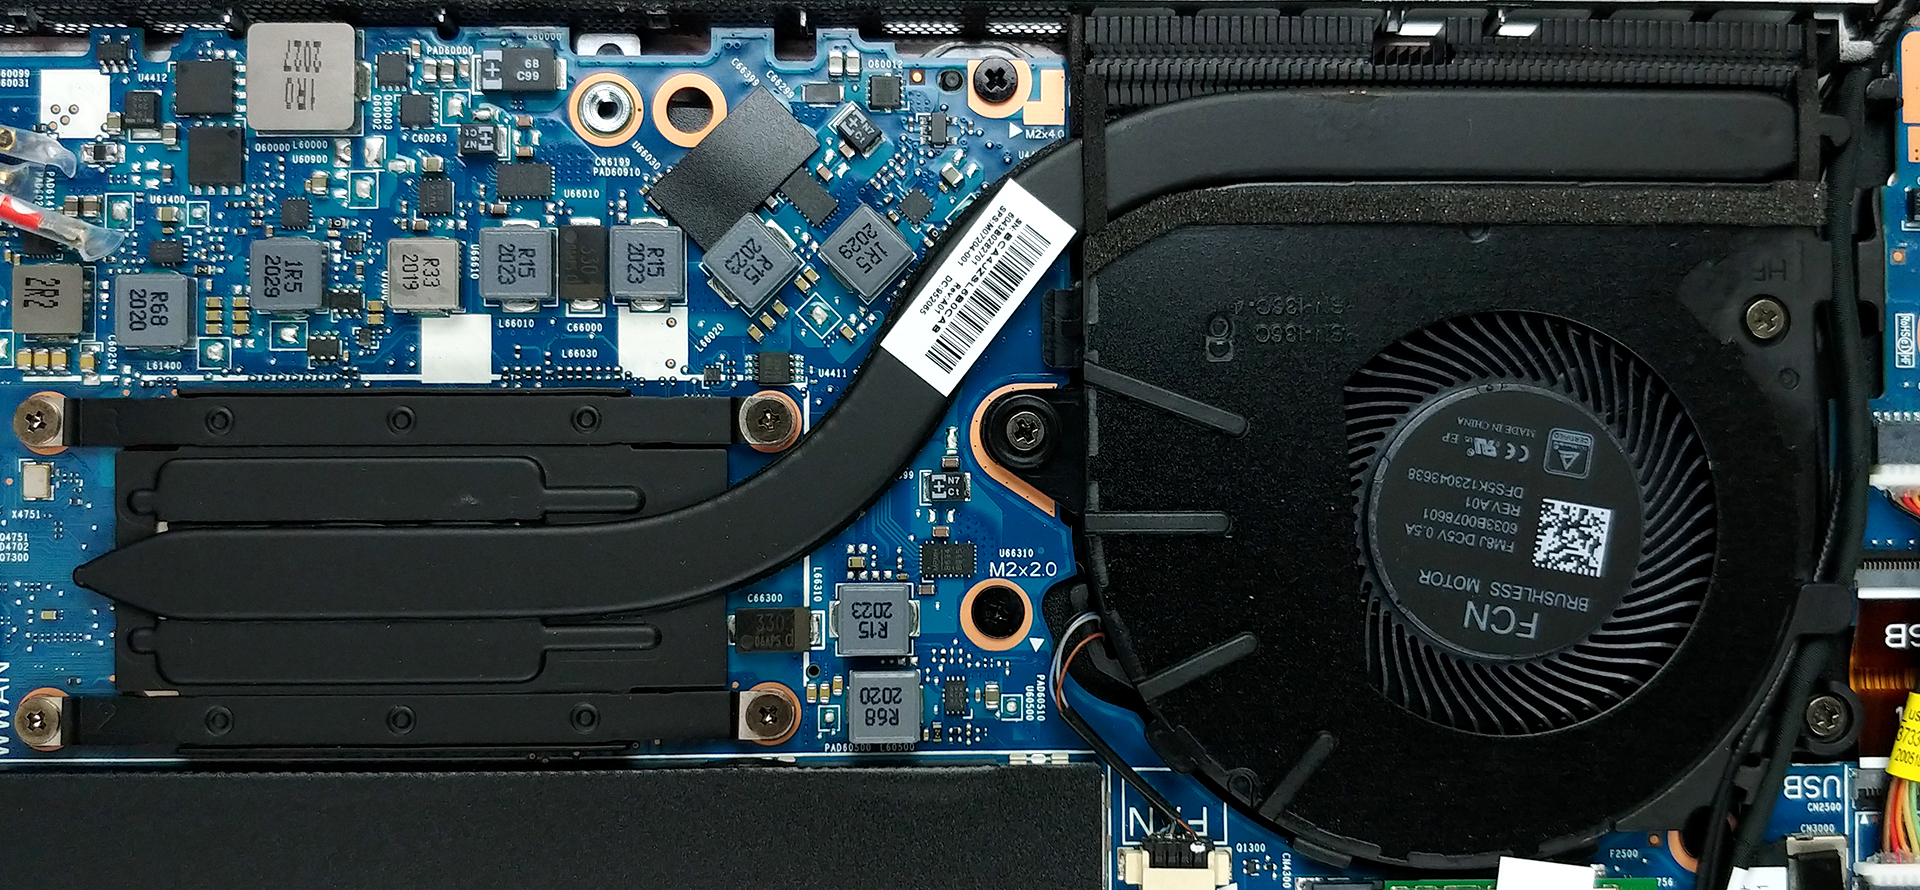 Inside HP EliteBook 830 G7 - disassembly and upgrade options